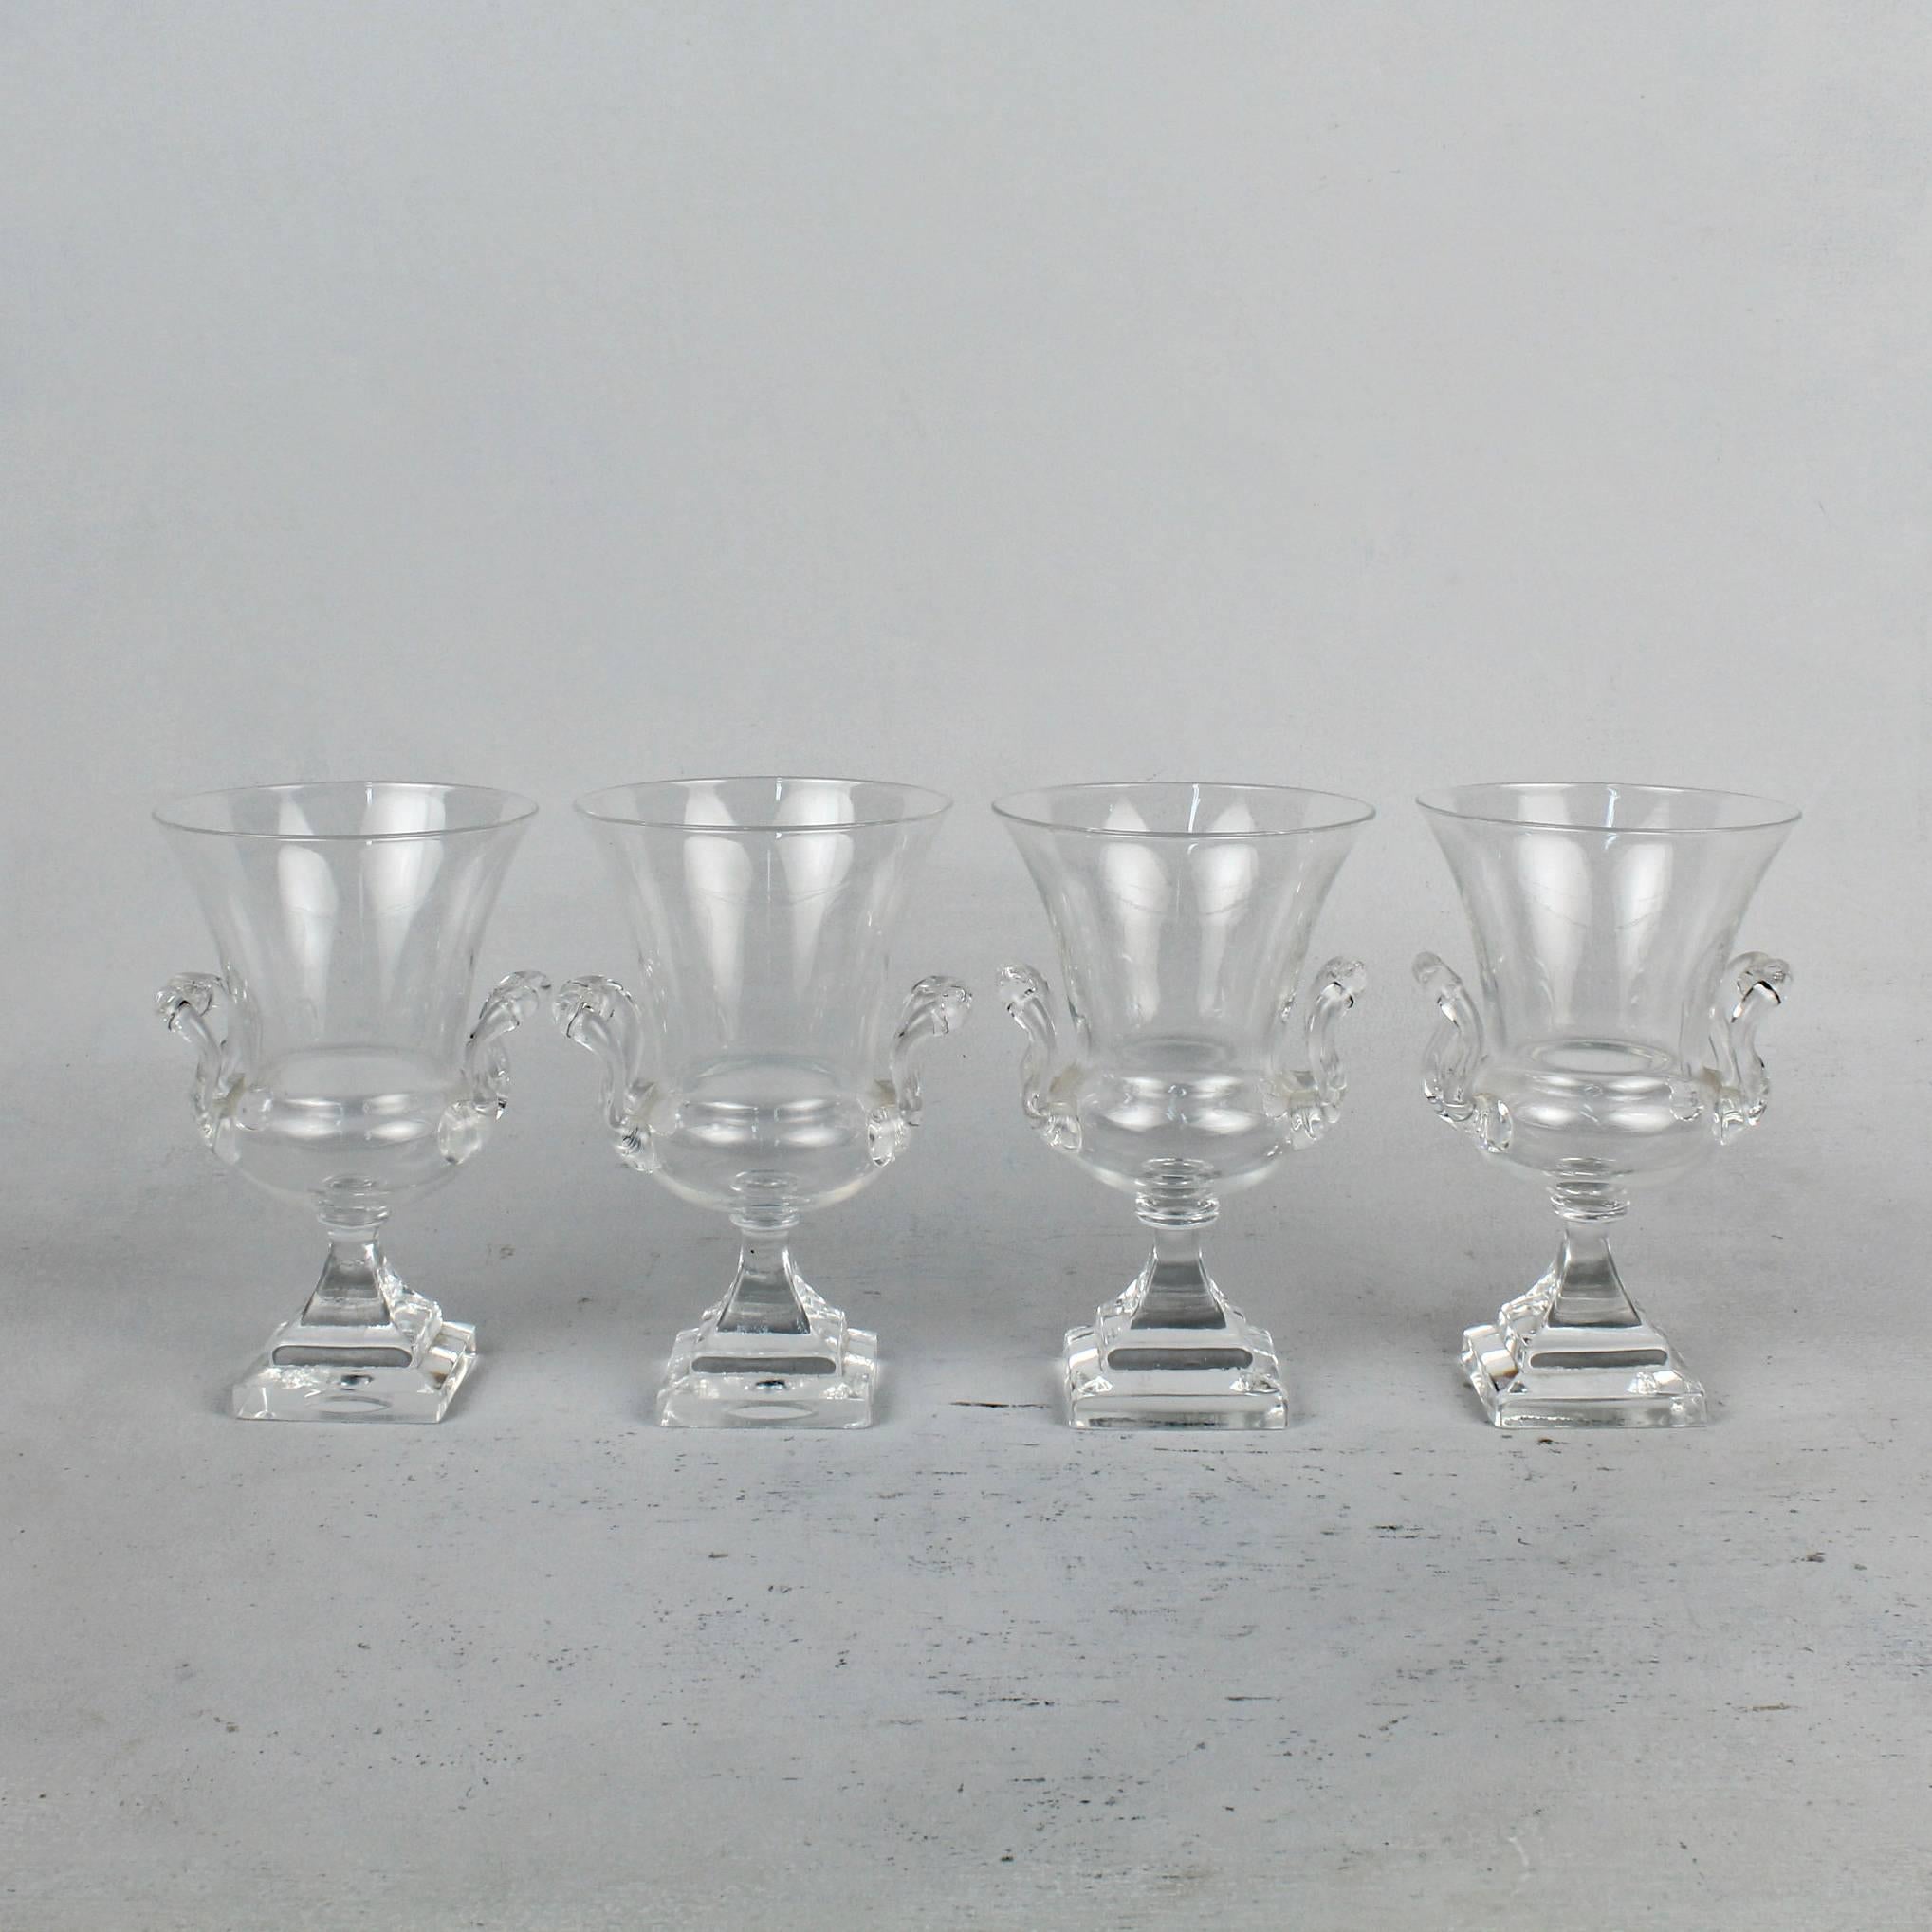 Four steuben glass campagna form urns.

Each urn has applied 'M' shaped handles and rests on a stepped base.

Bases each bear an etched factory mark.

Height each: circa 6 1/2 in.

Items purchased from David Sterner Antiques must delight